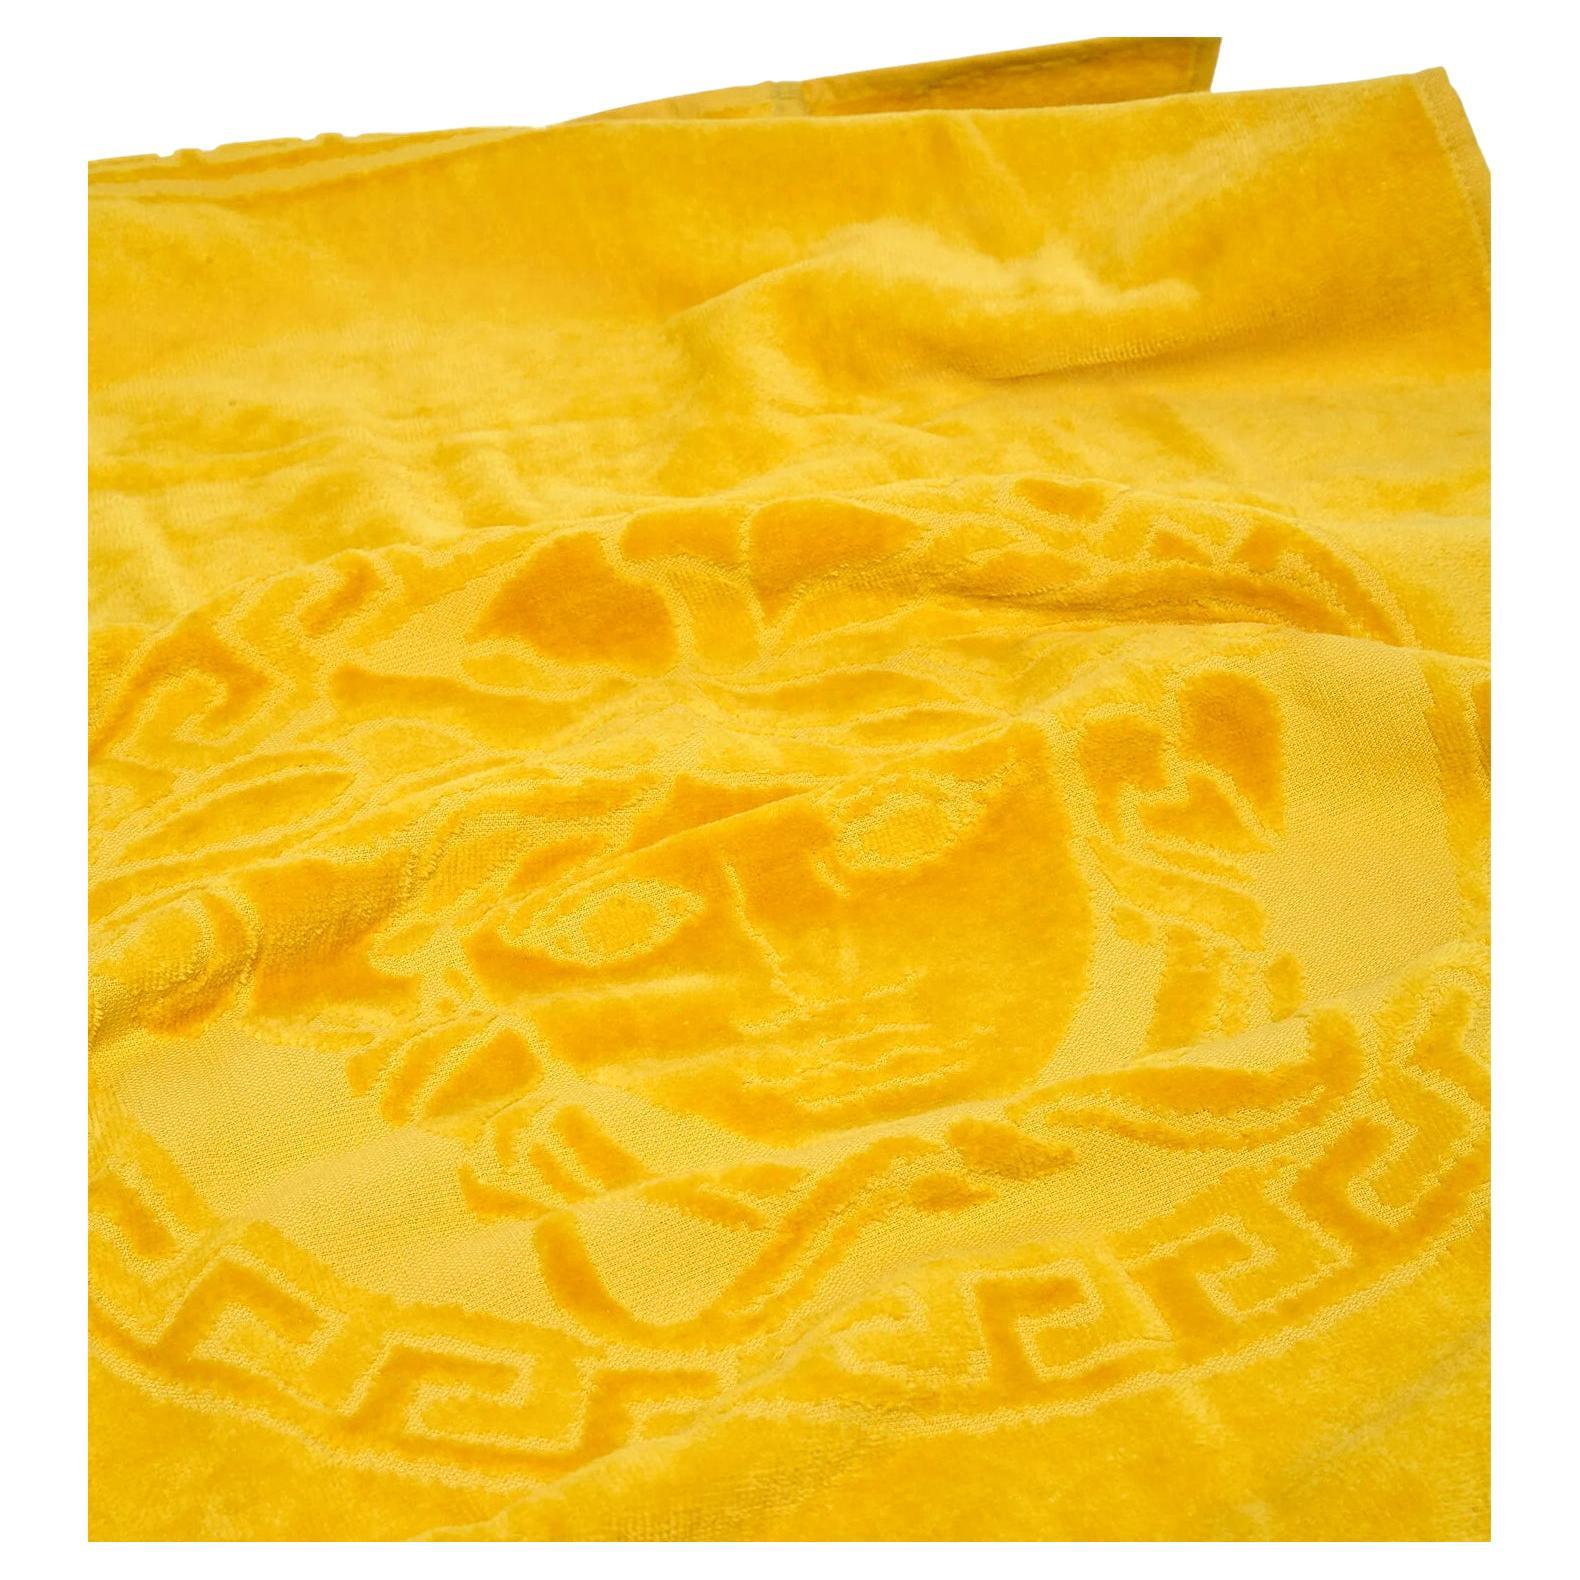 Versace Medusa gold hand towel, deep yellow, Italy. Perfect for pampering yourself or your guest, Versace towels are a must have for any contemporary and luxurious home. 100% Cotton See dimensions below:
One hand towel: 16